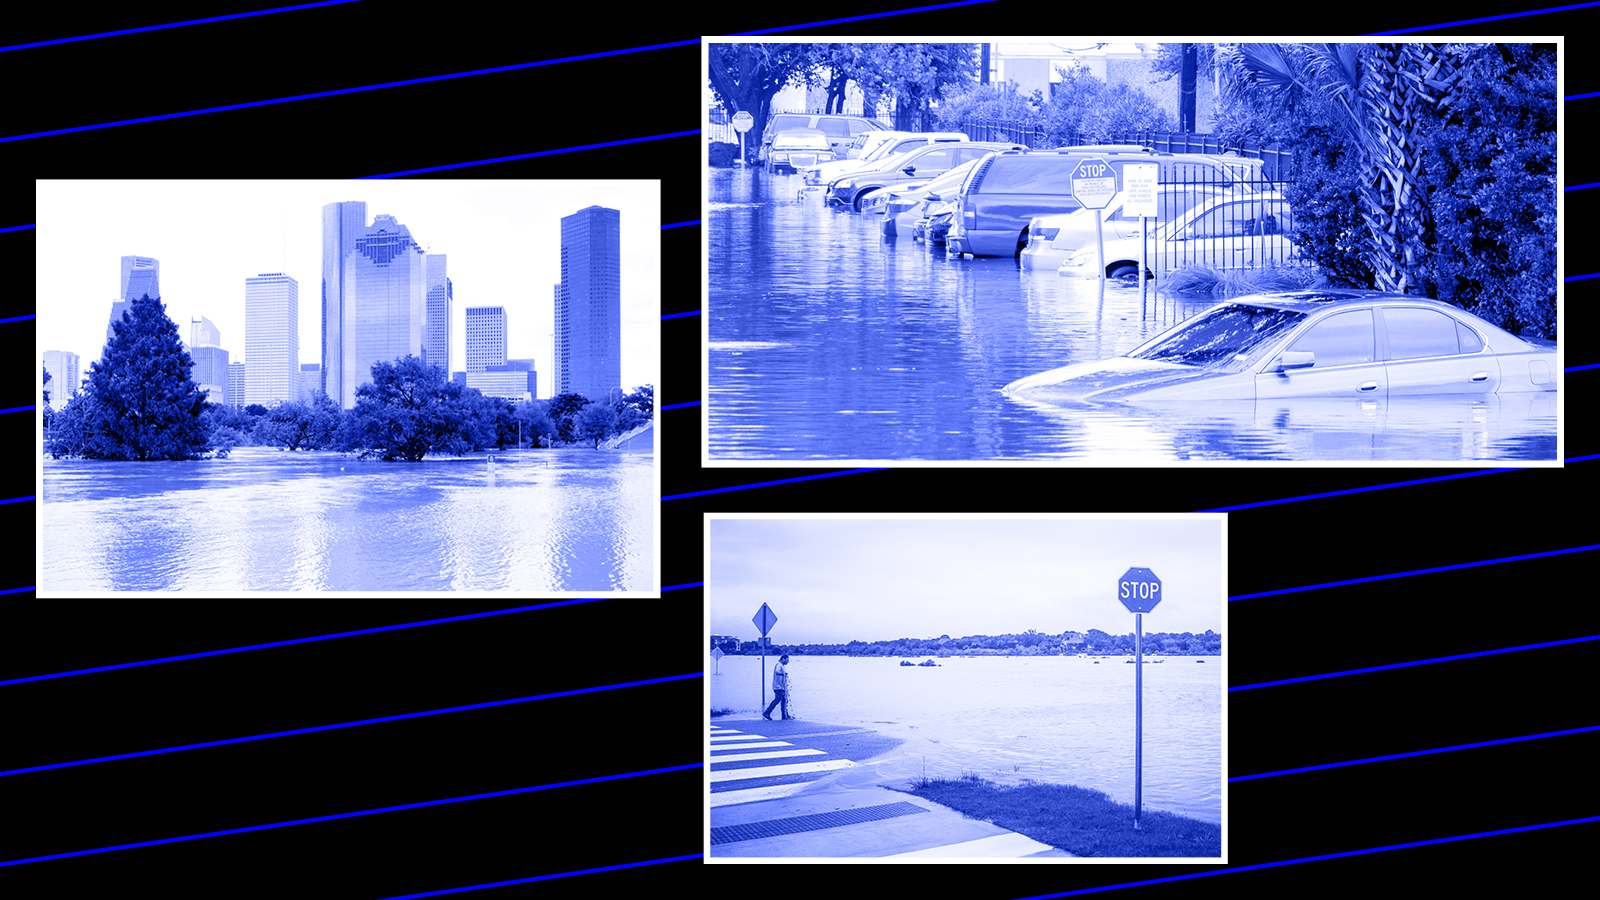 Collage of blue flood images on a black background with blue stripes.